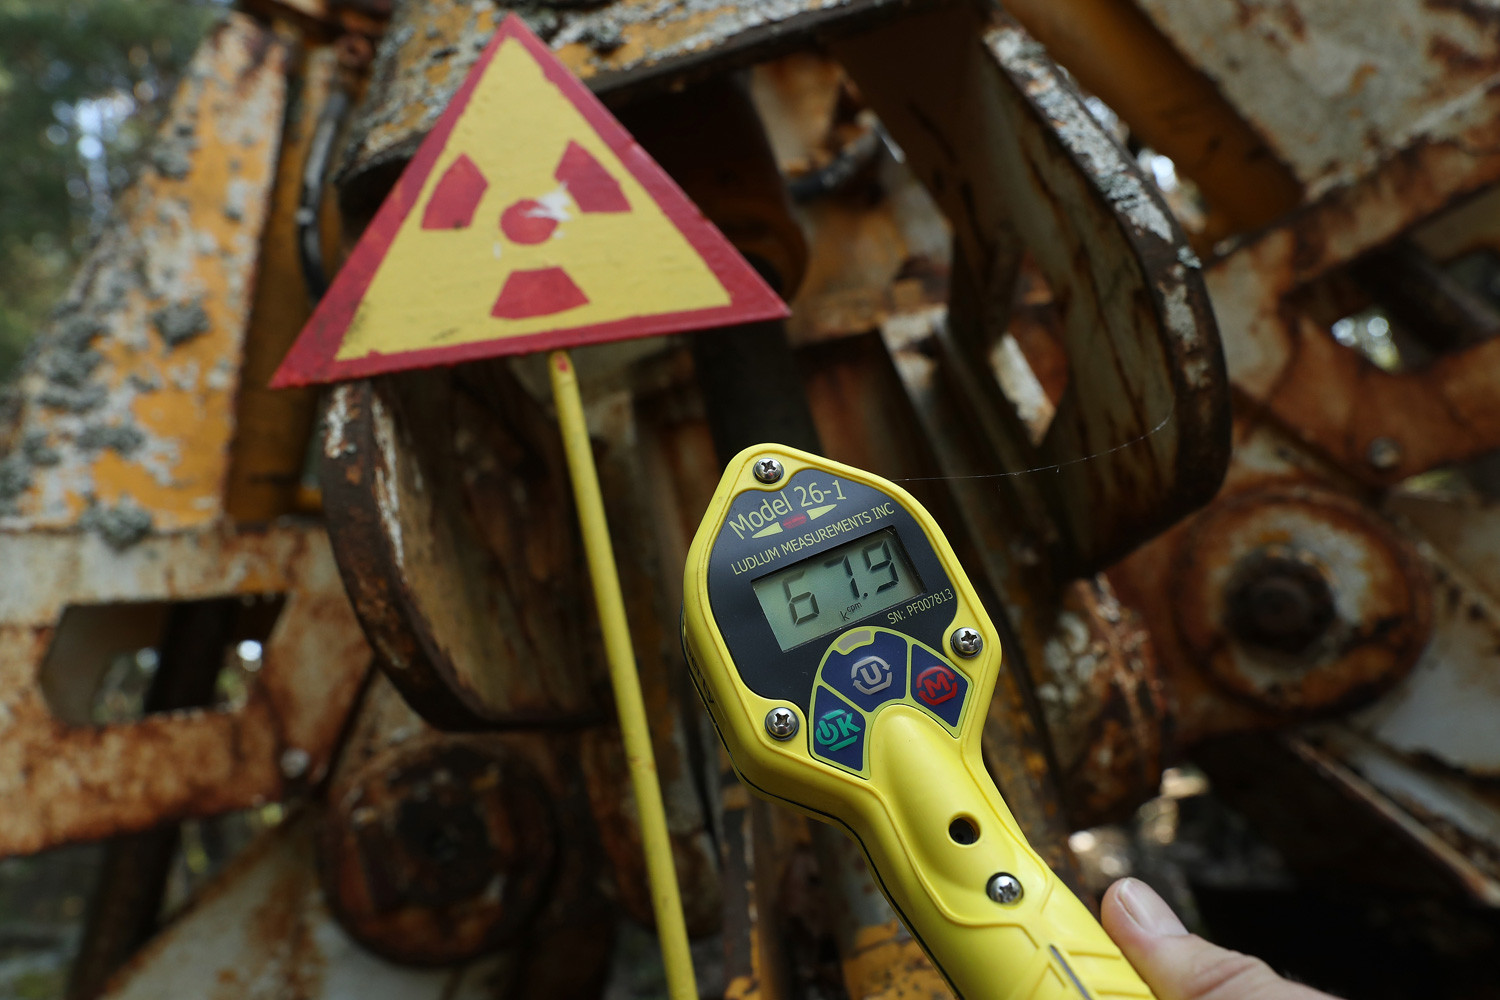 A Geiger counter shows a reading of 679,000 counts per minute near a metal claw contaminated with radioactivity in the ghost town of Pripyat in 2017. Such radiation level still surpasses the normal one seriously.